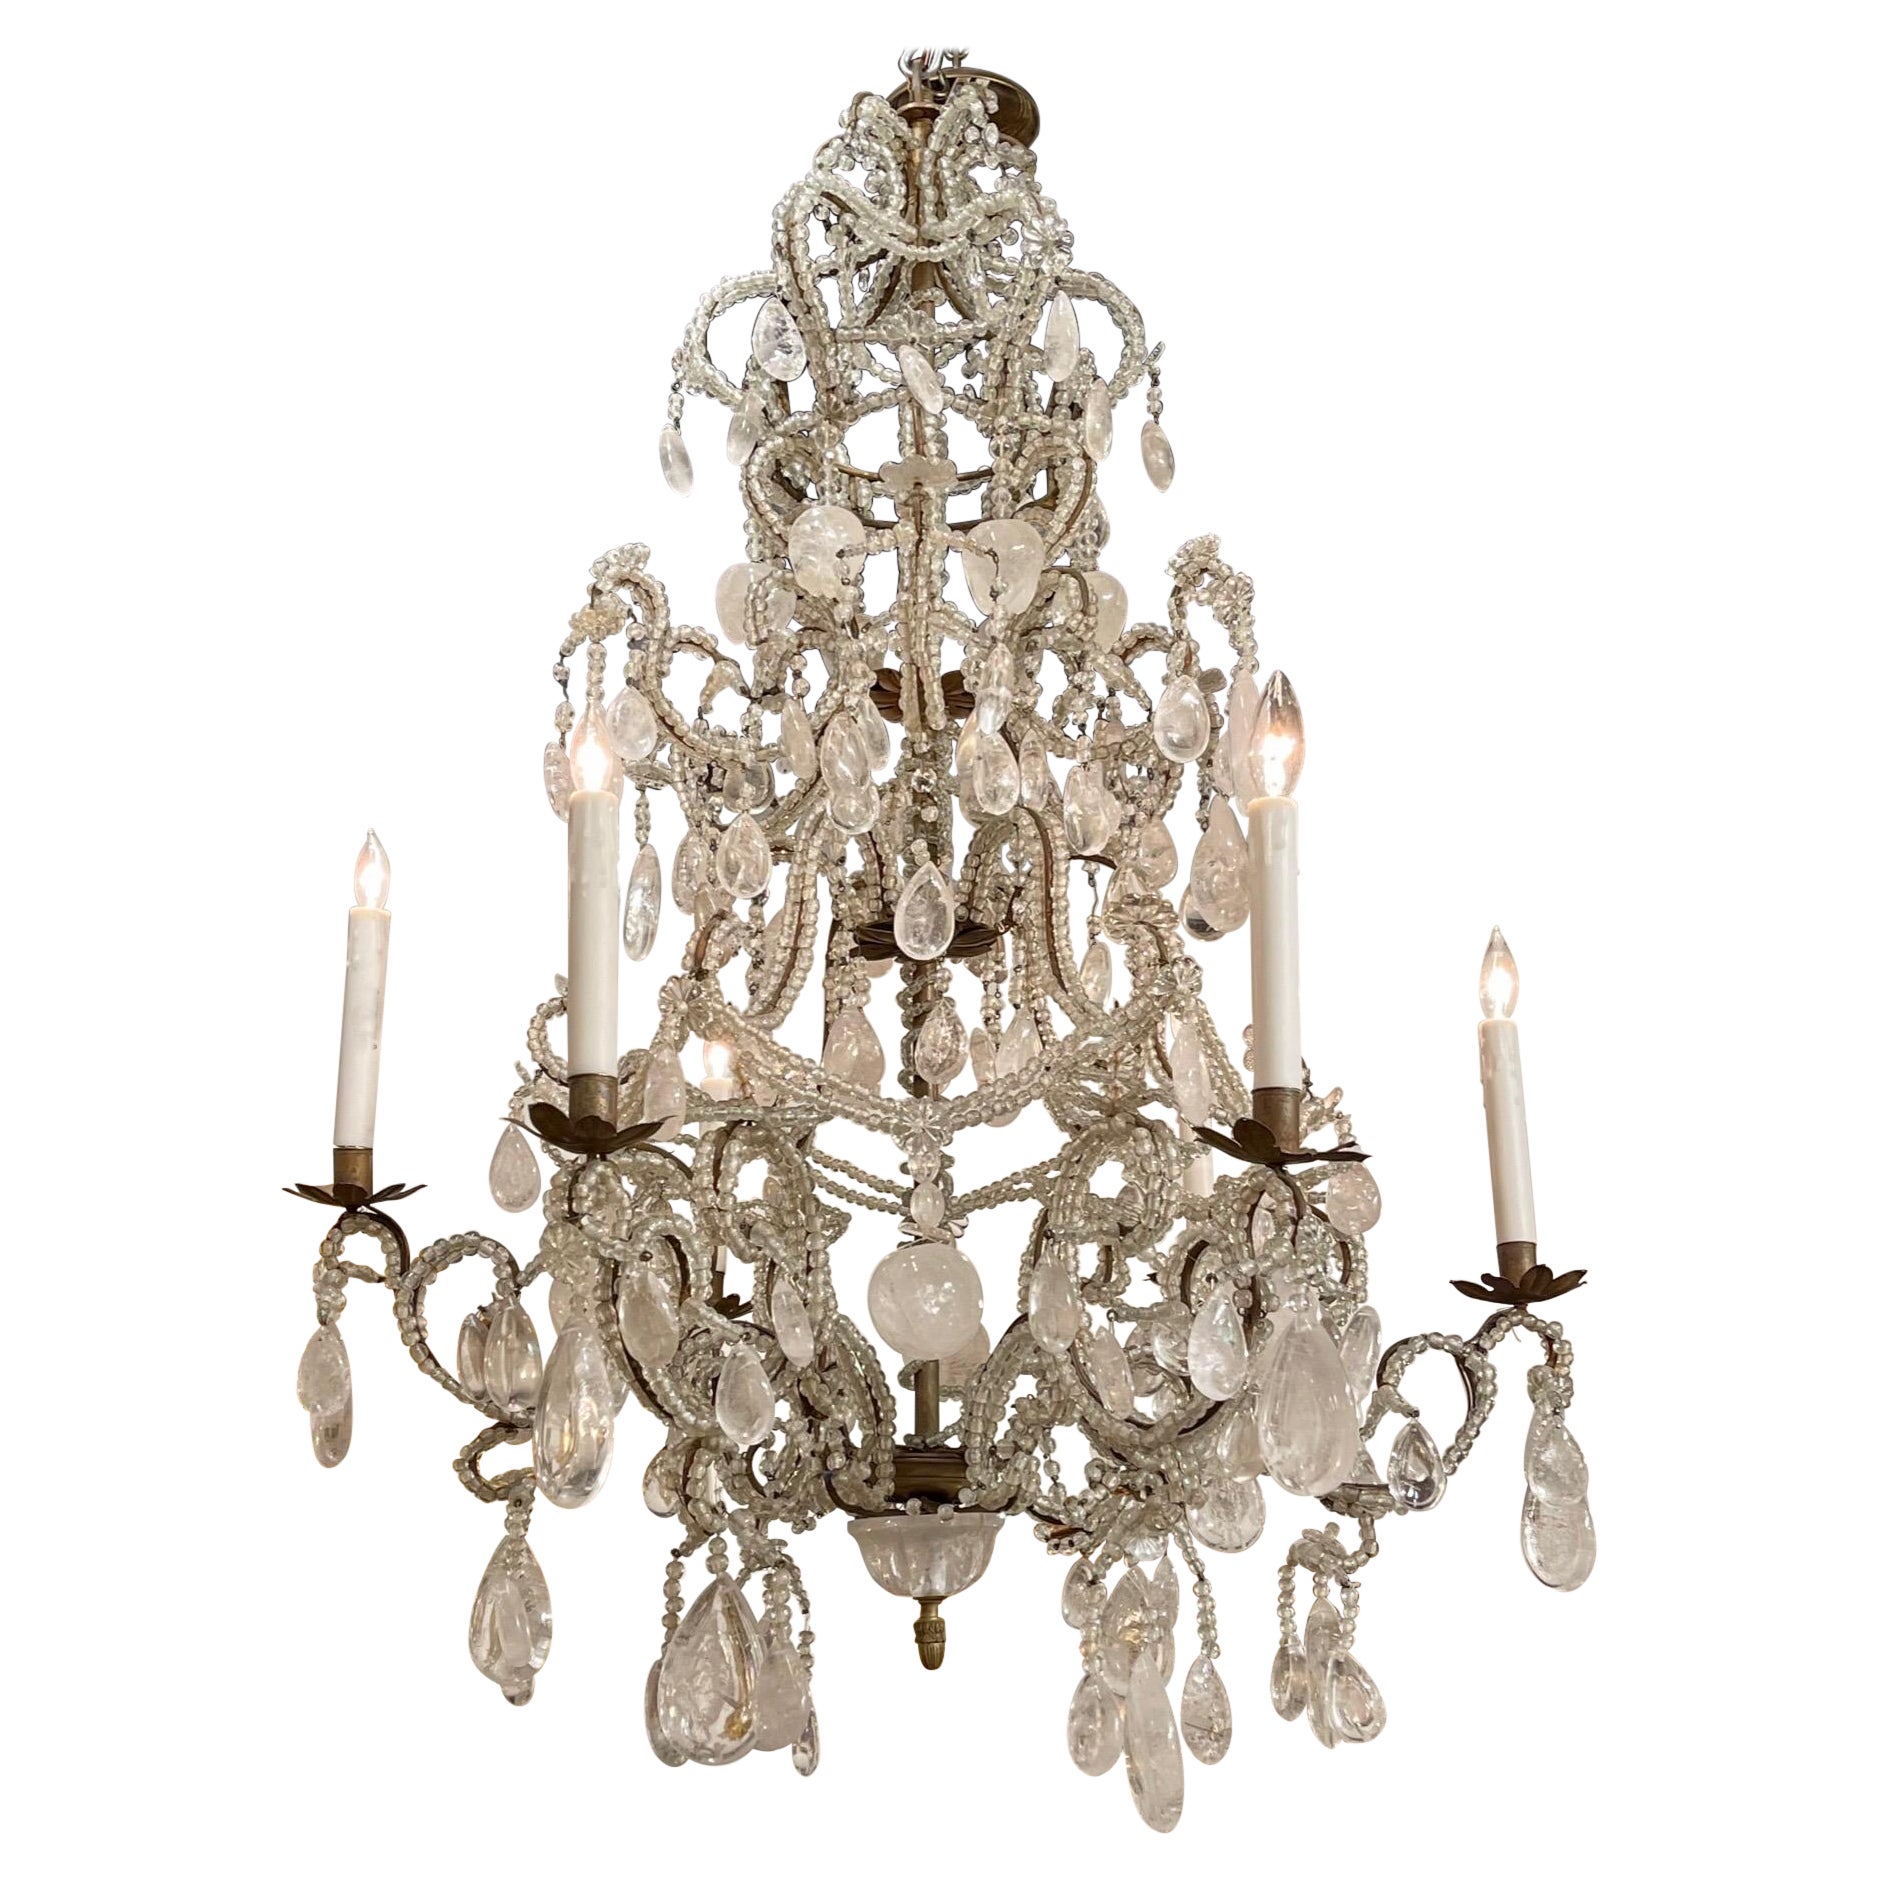 19th Century French Rock Crystal Chandelier with 6 Lights